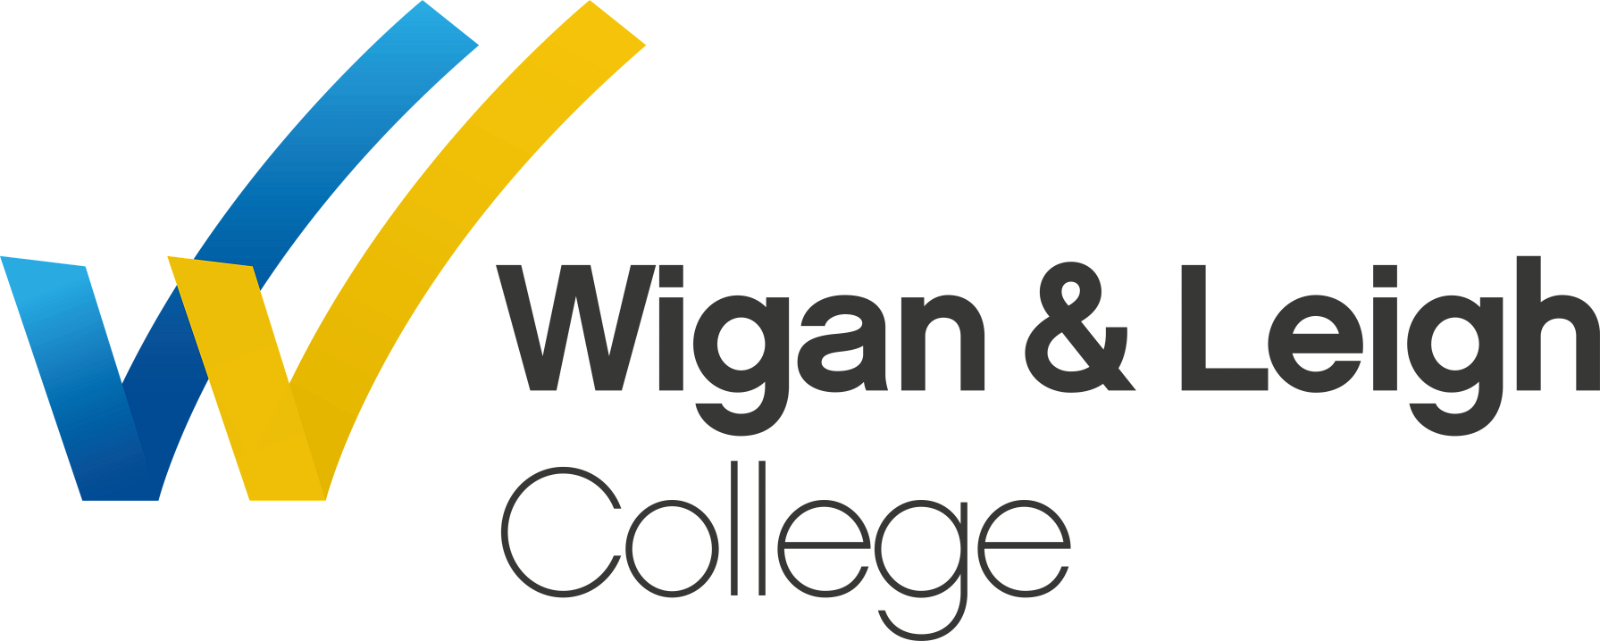 wigan and leigh college logo